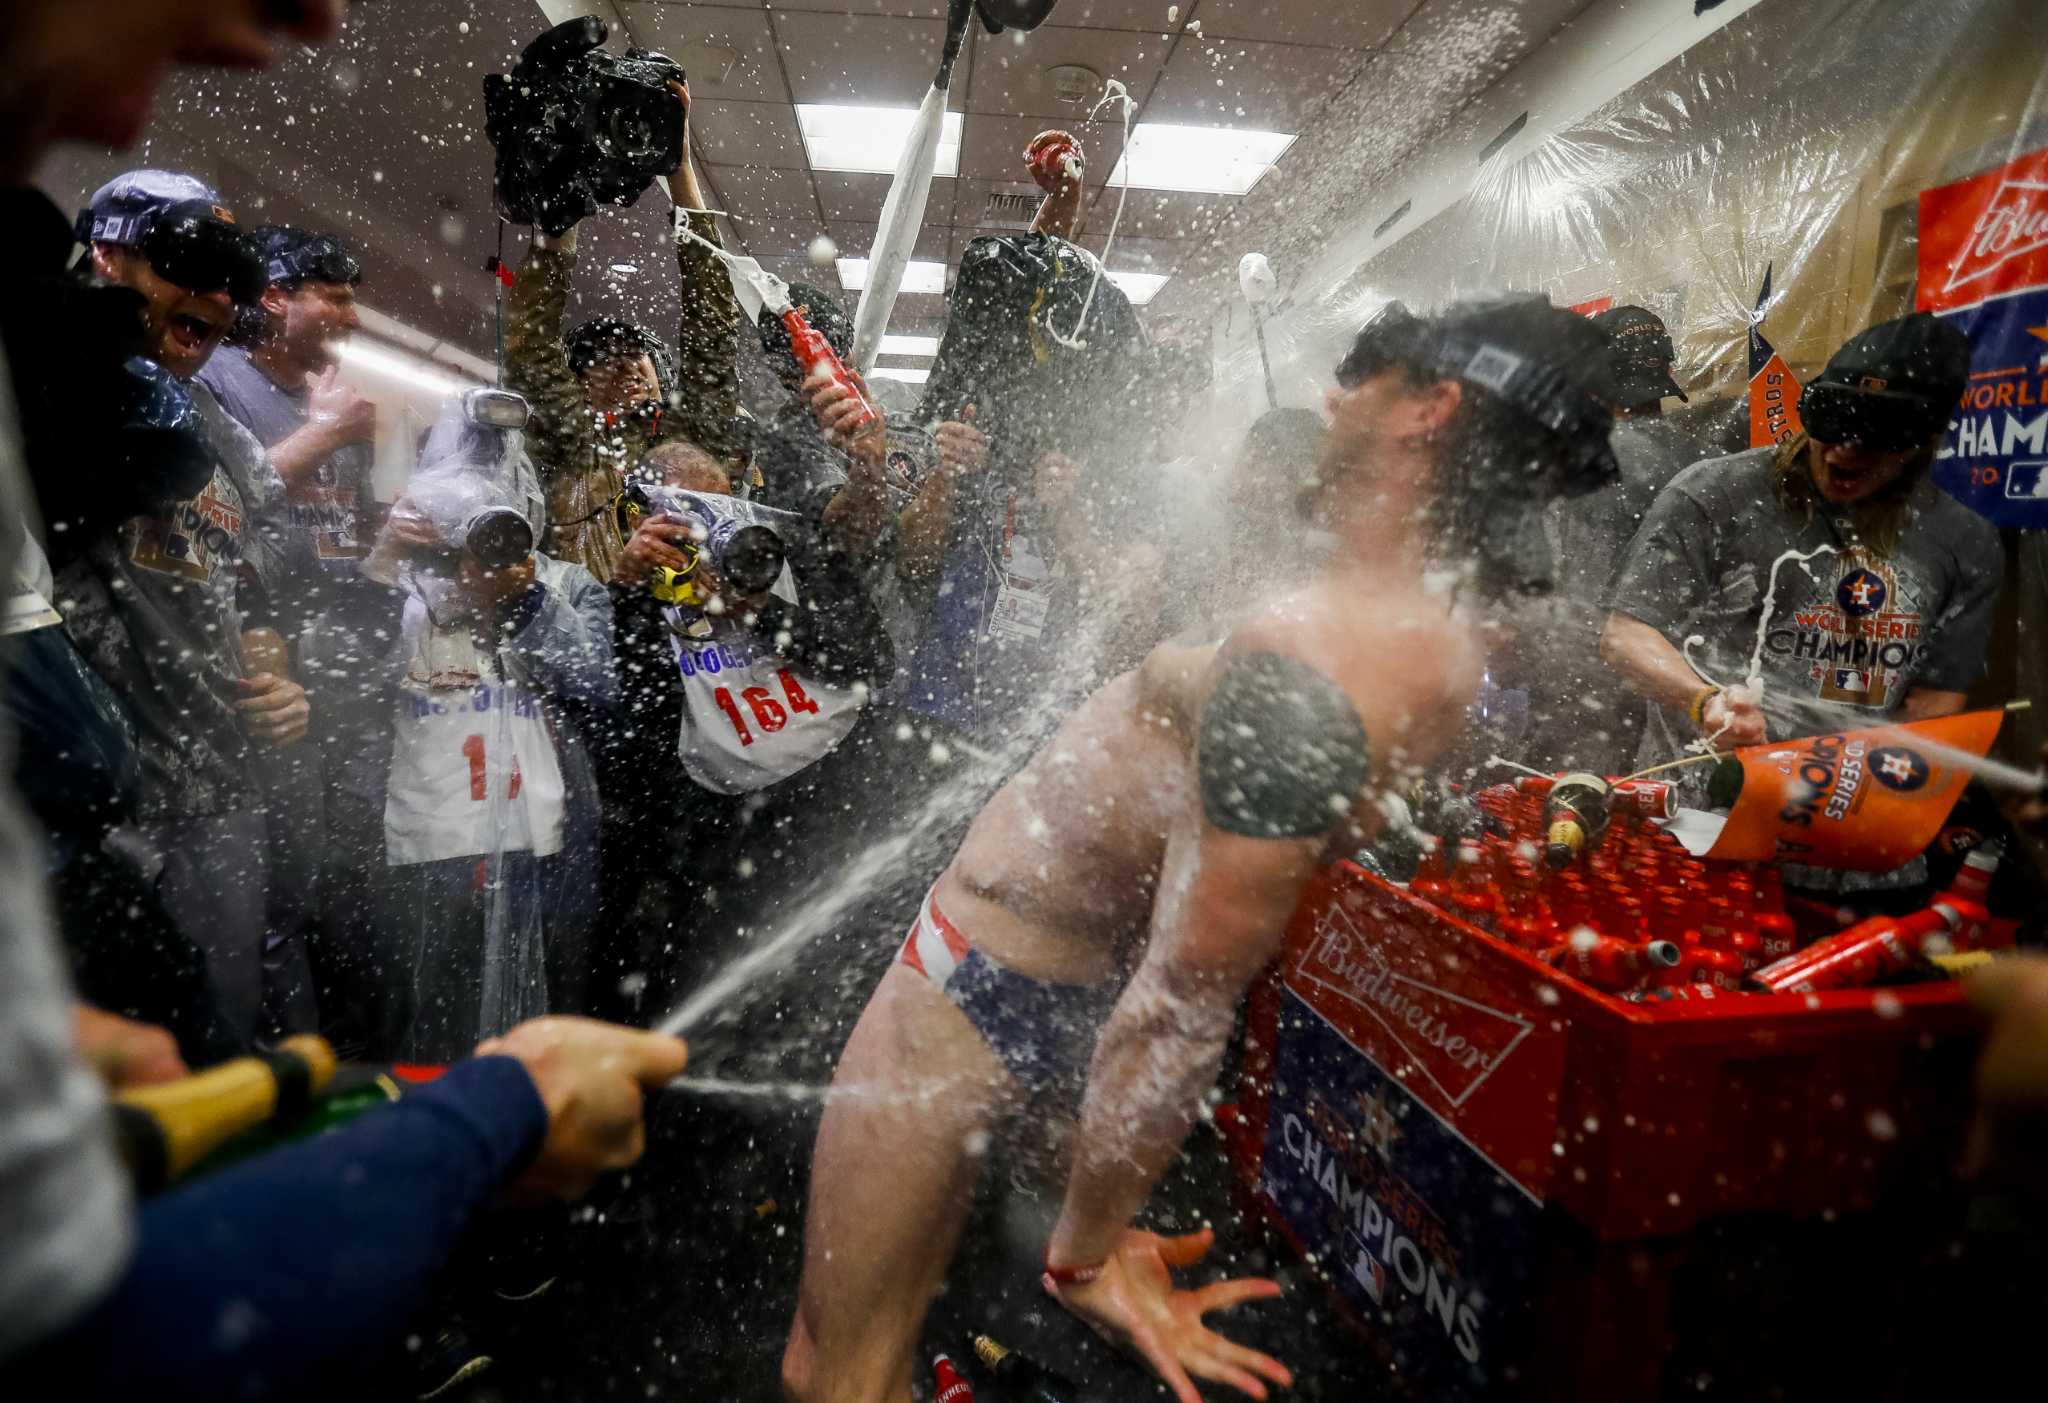 Photos of Astros' ALCS clubhous champagne celebration in New York